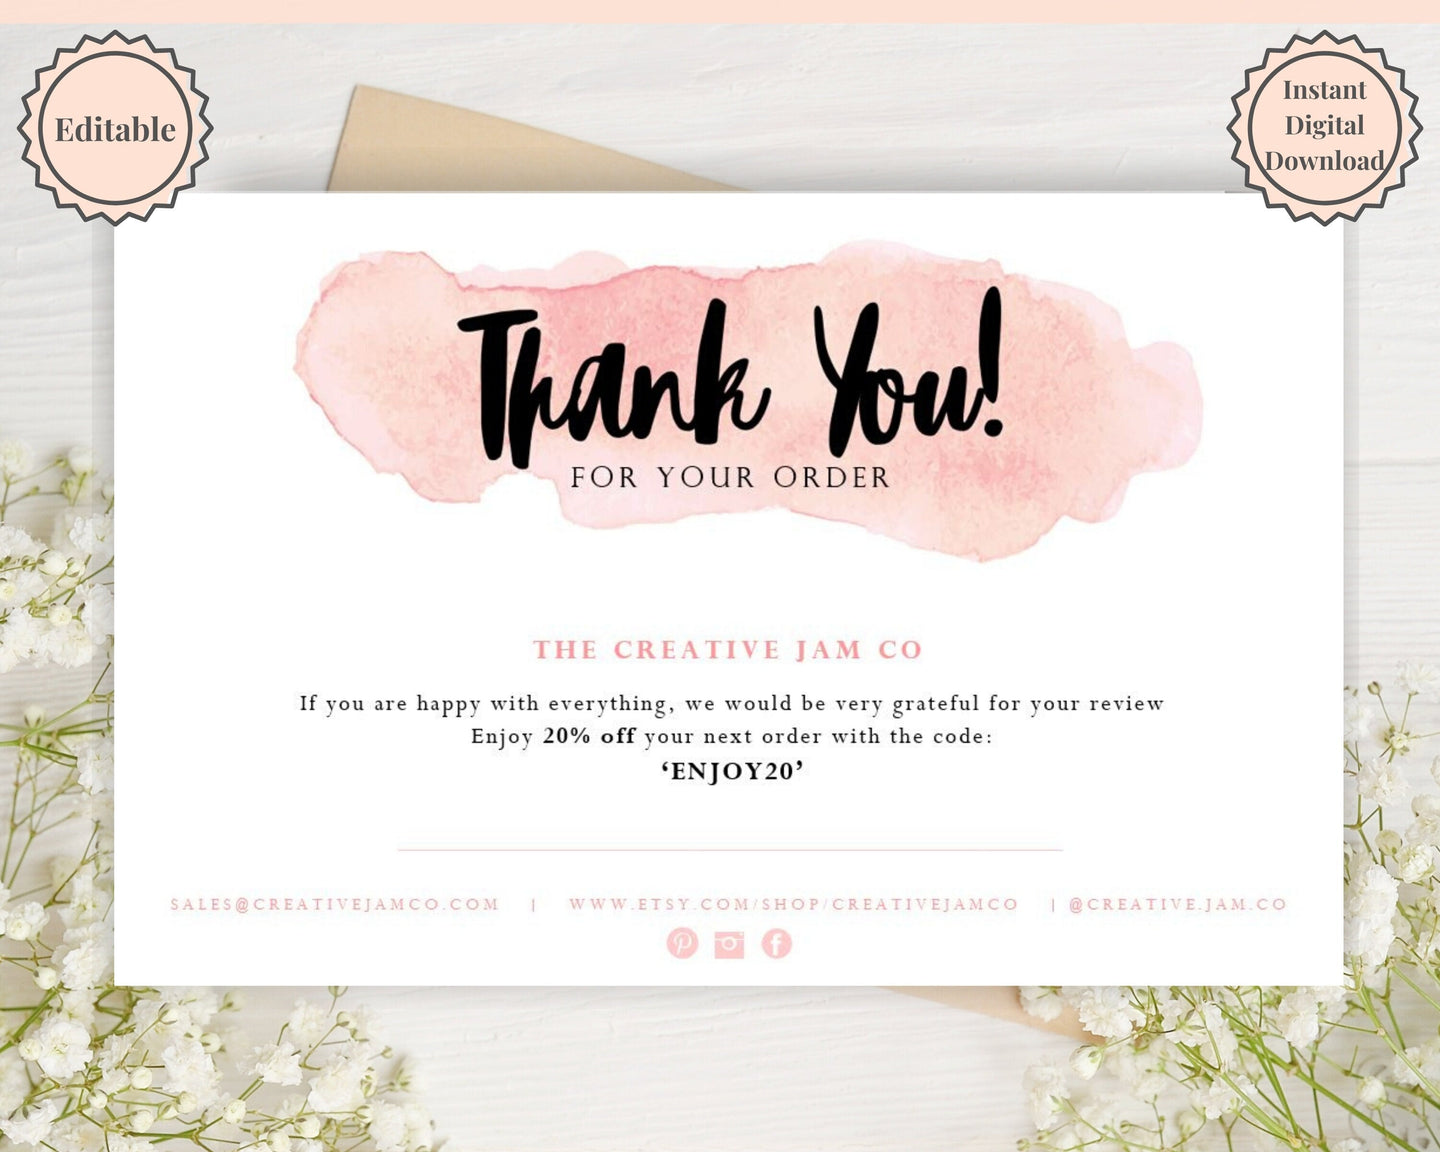 Business Thank You For Your Order Insert Card Template. EDITABLE Parcel Insert, Etsy Order, Small Online Business Purchase | Pink Watercolor Style 2